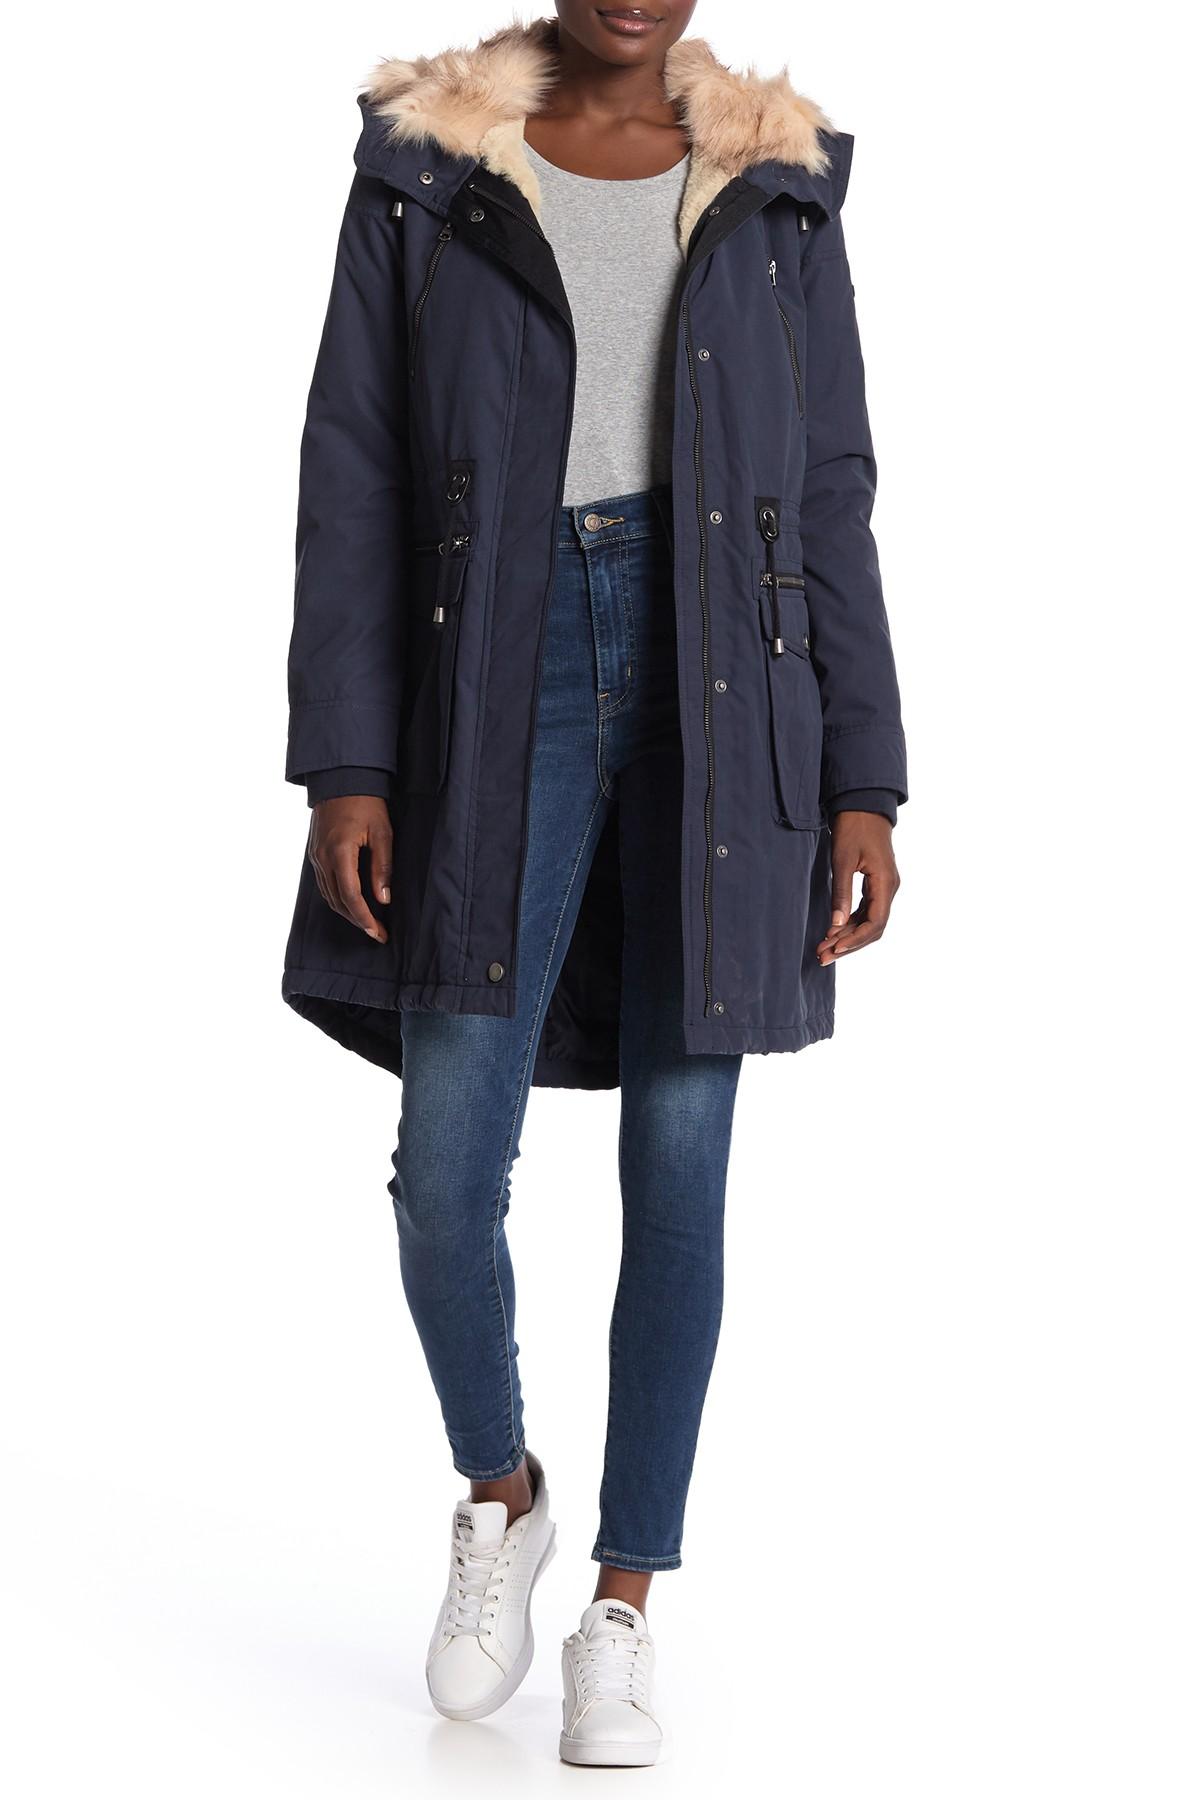 Lucky Brand Faux Fur Lined Parka in Navy (Blue) | Lyst